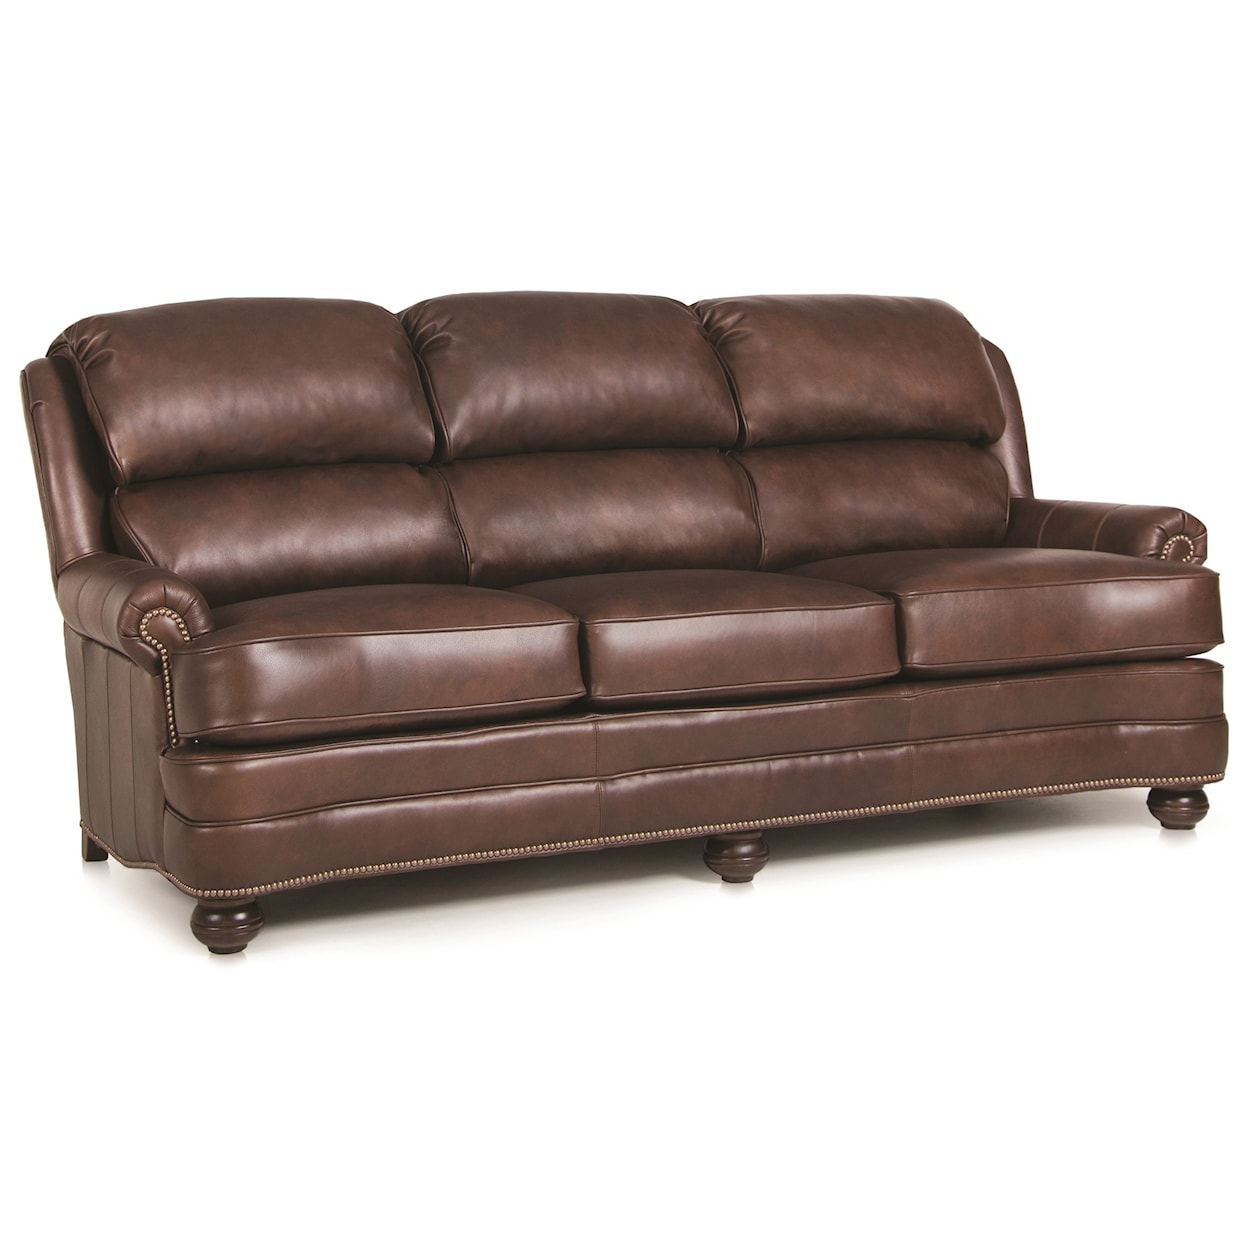 Smith Brothers 311 Upholstered Stationary Sofa